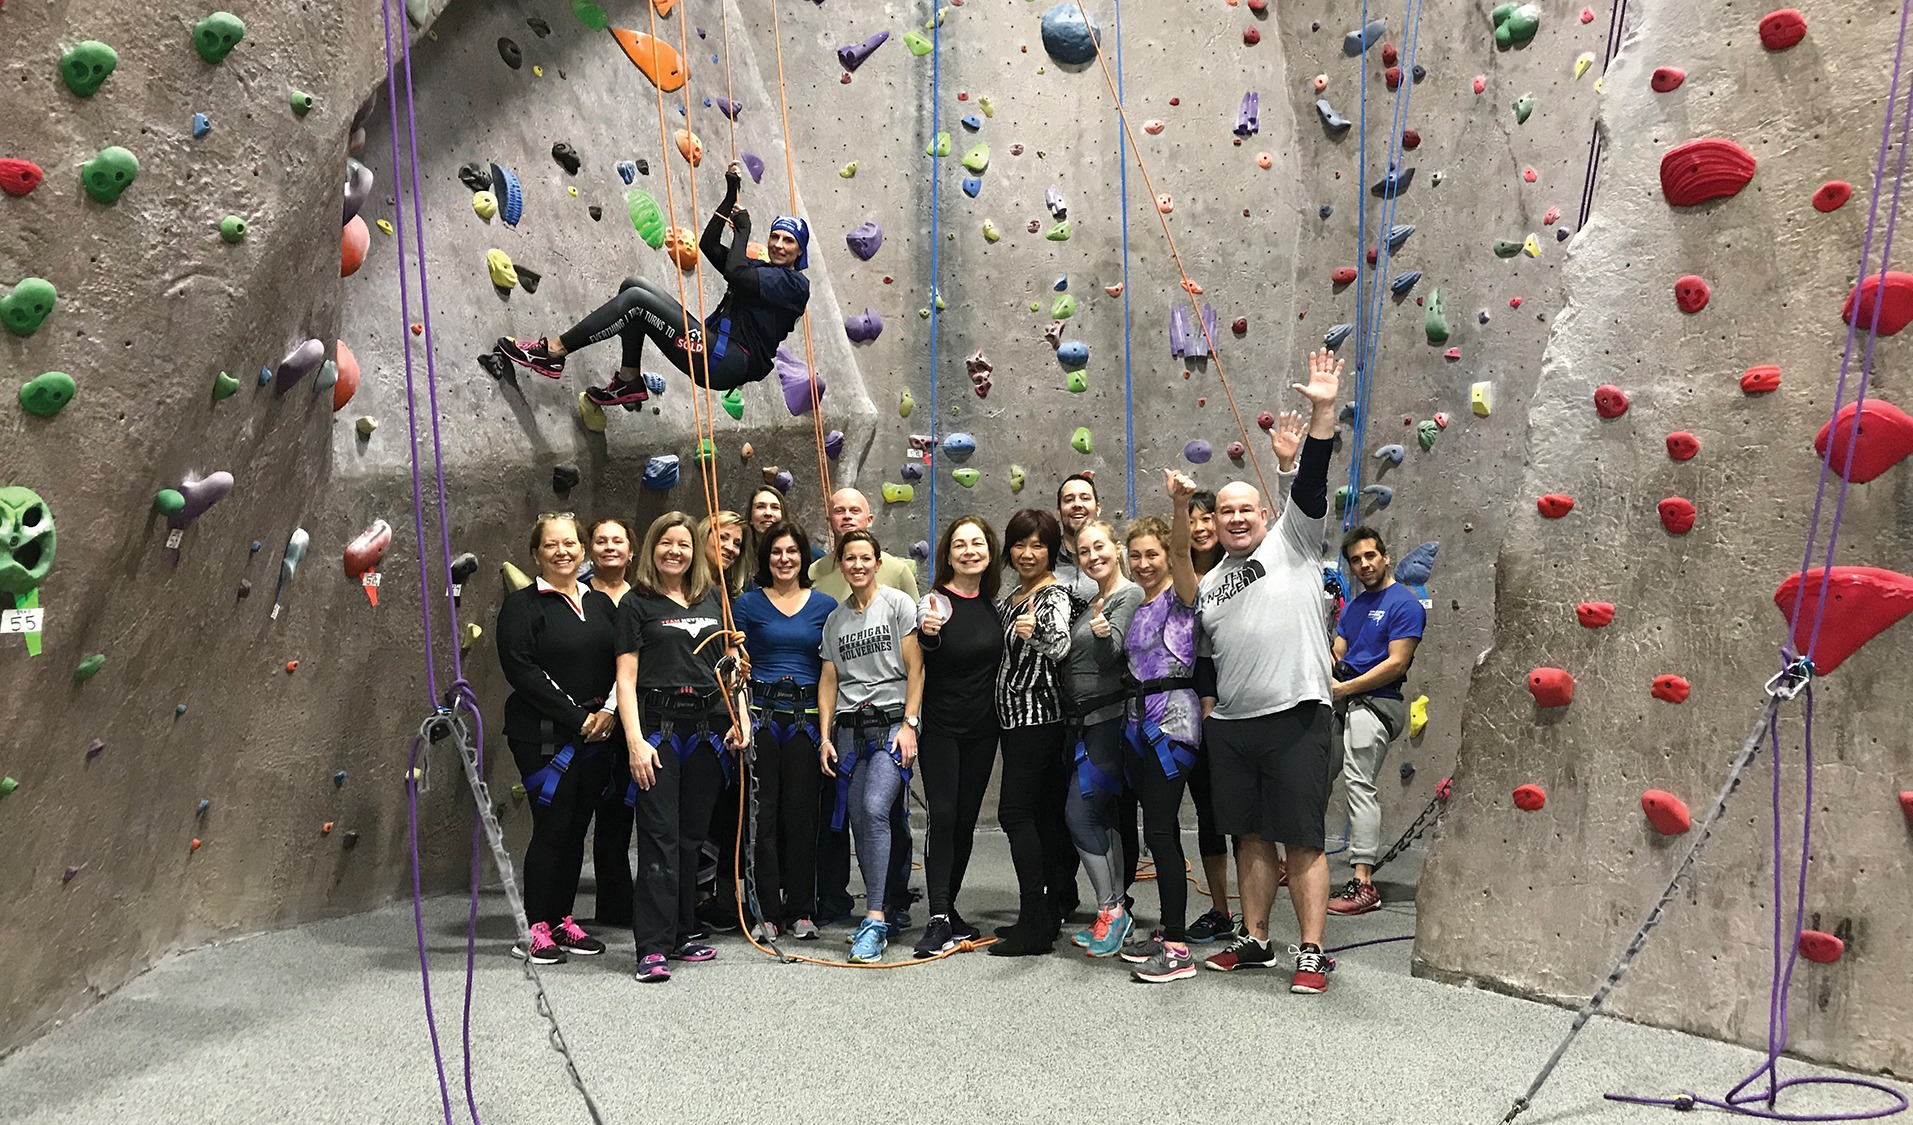 Reaching new heights at the Coach Realtors® rock climbing event (Feb. 2018)